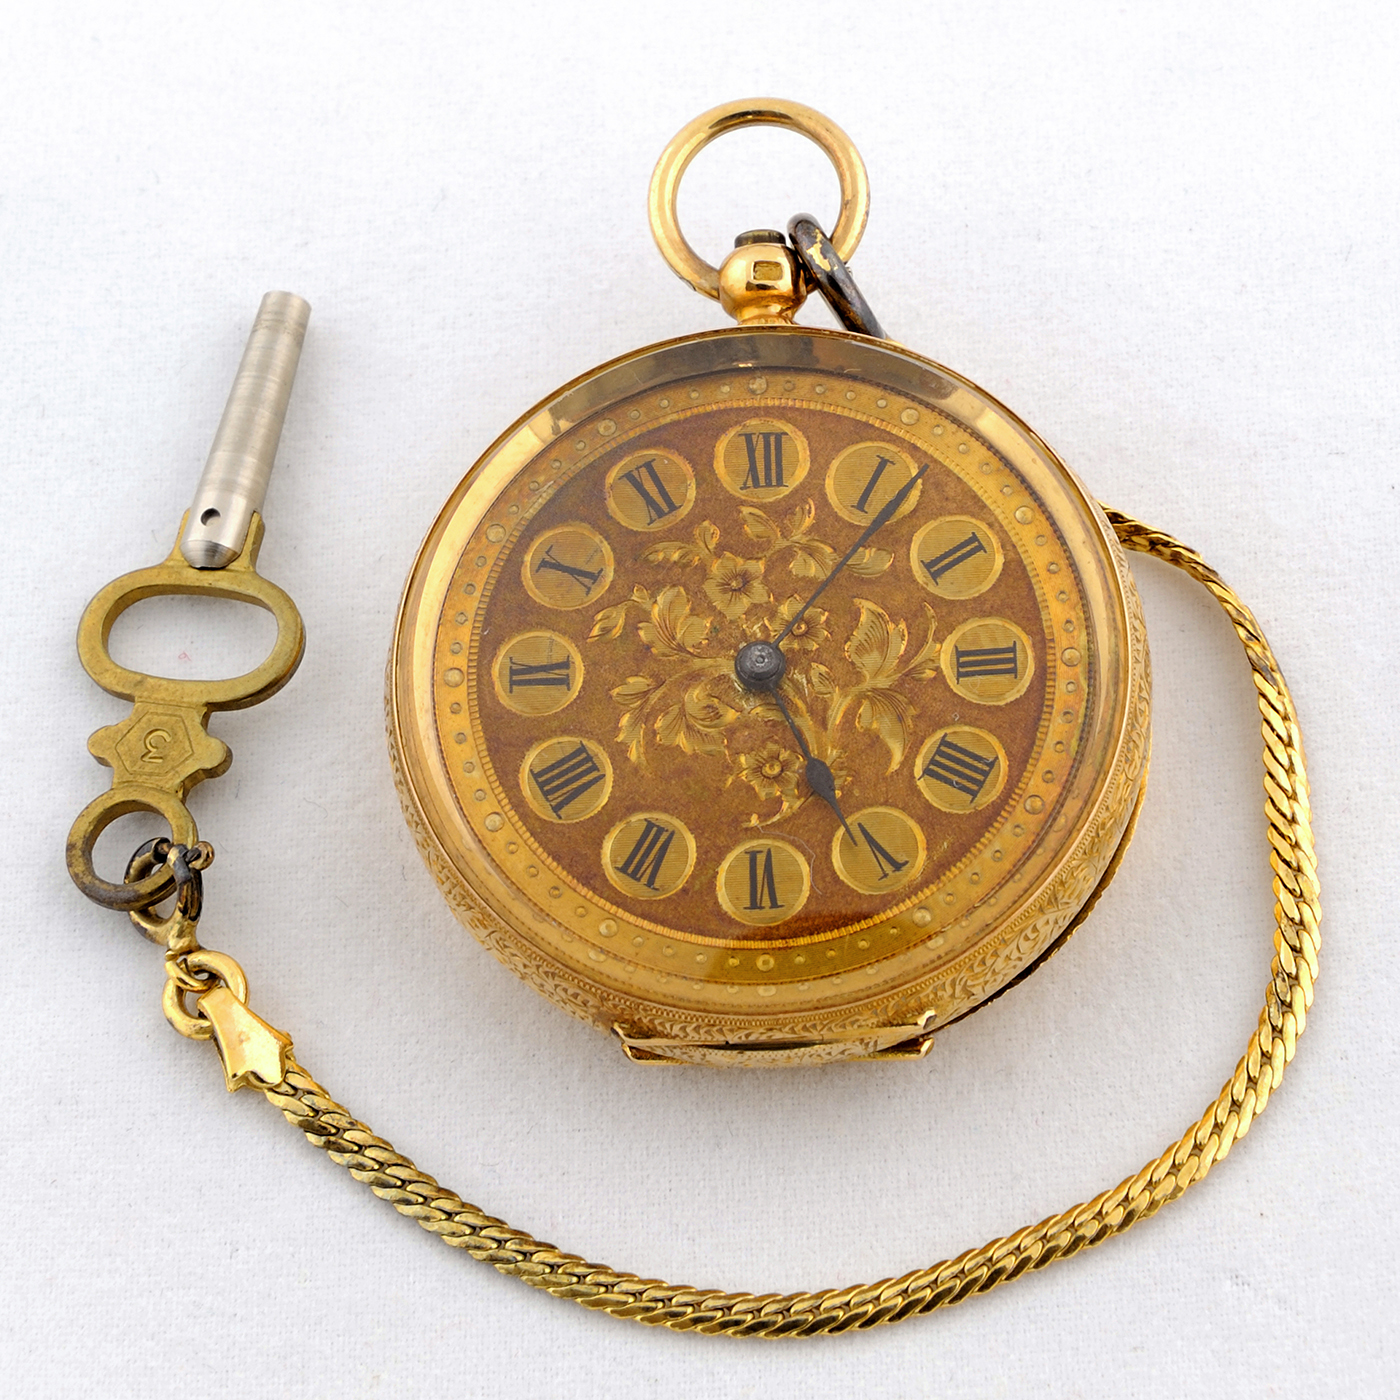 Sold At Auction: Gluck Swiss Made Chateau Pocket Watch | lupon.gov.ph